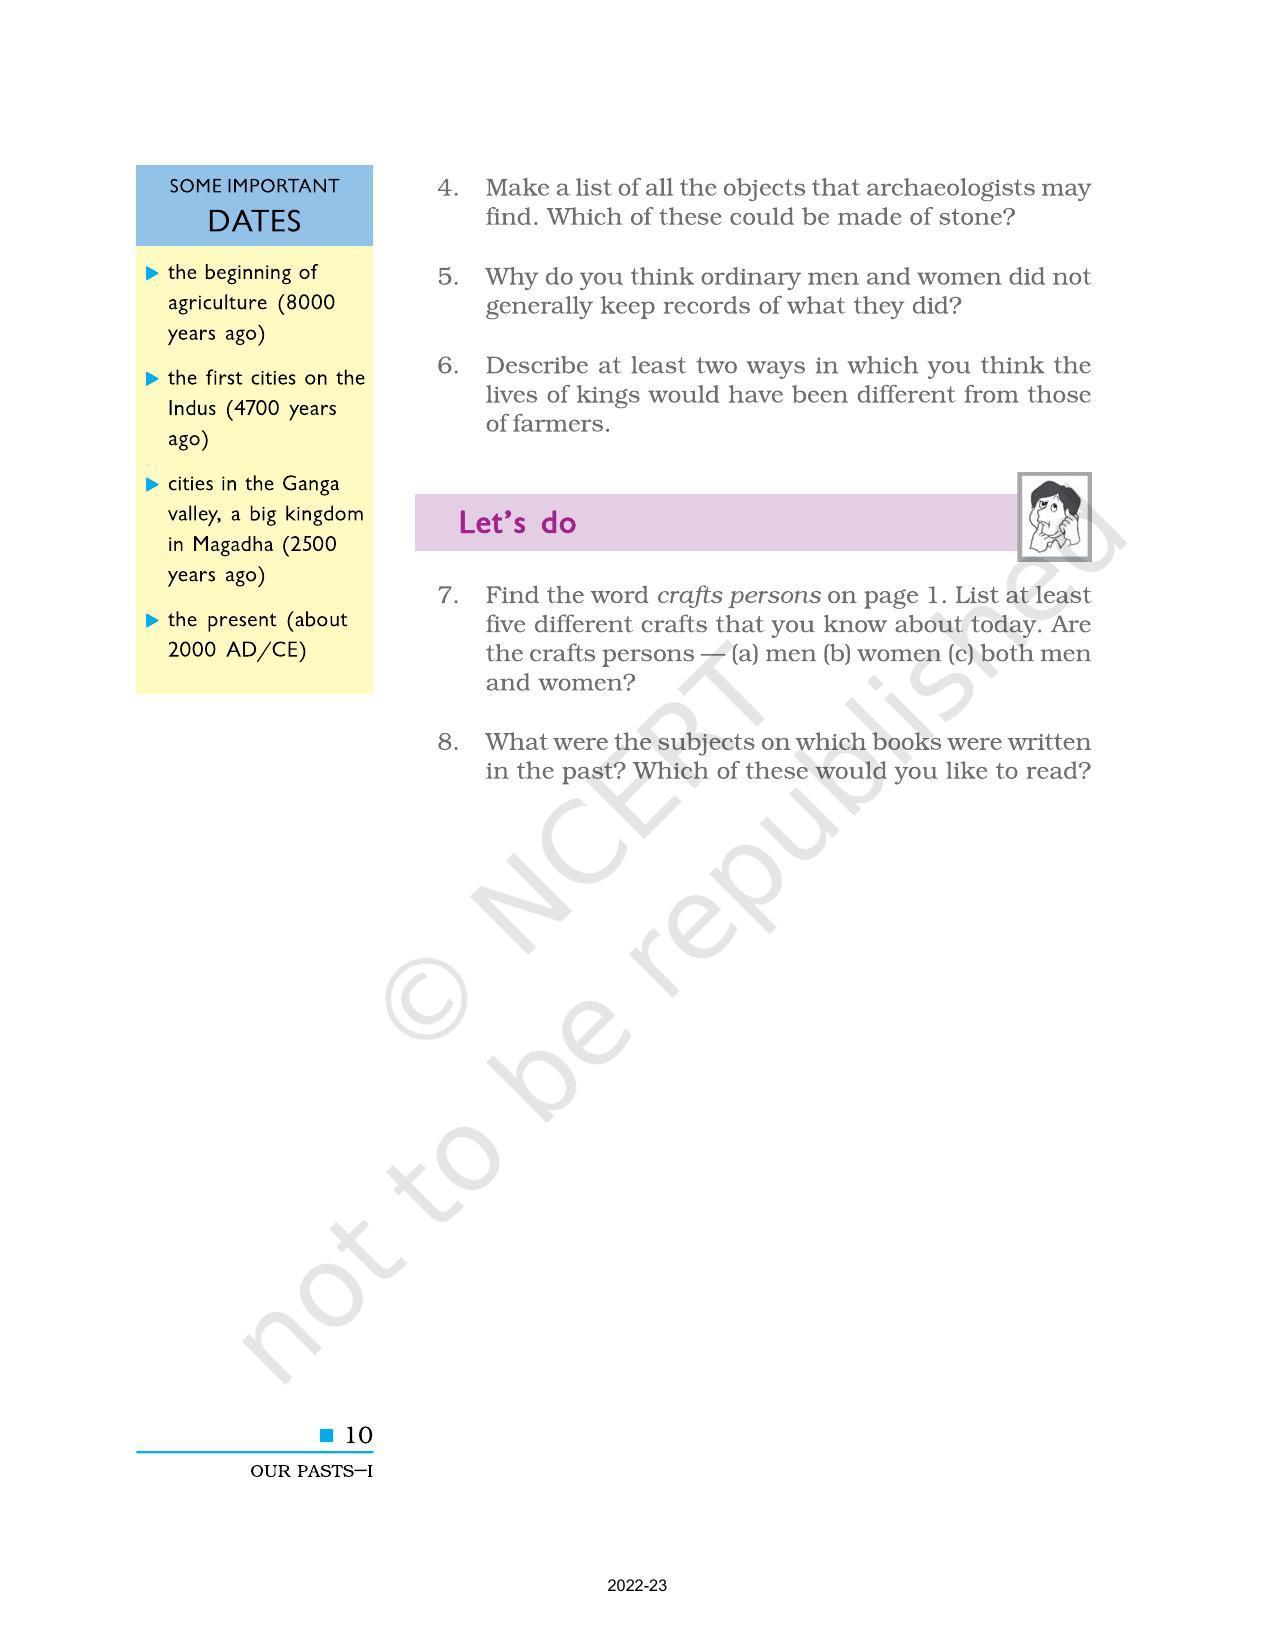 NCERT Book for Class 6 History (Social Science) : Chapter 1-What Where, How, and When? - Page 10